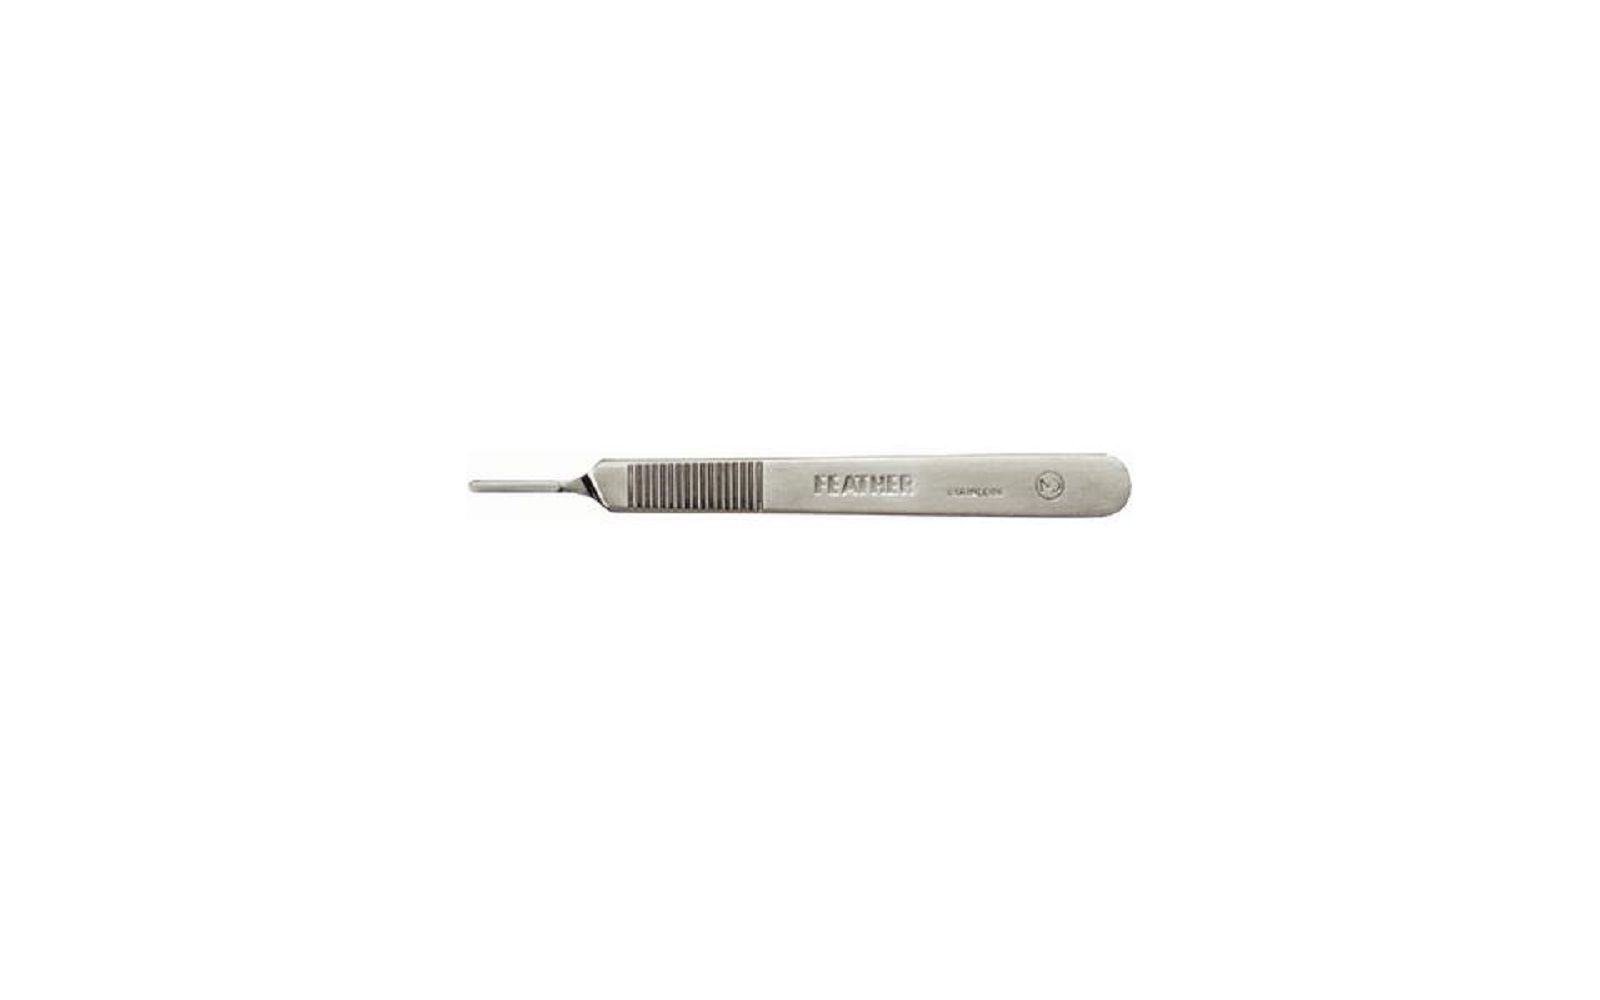 Microsurgical scalpel handles – # 3, stainless steel